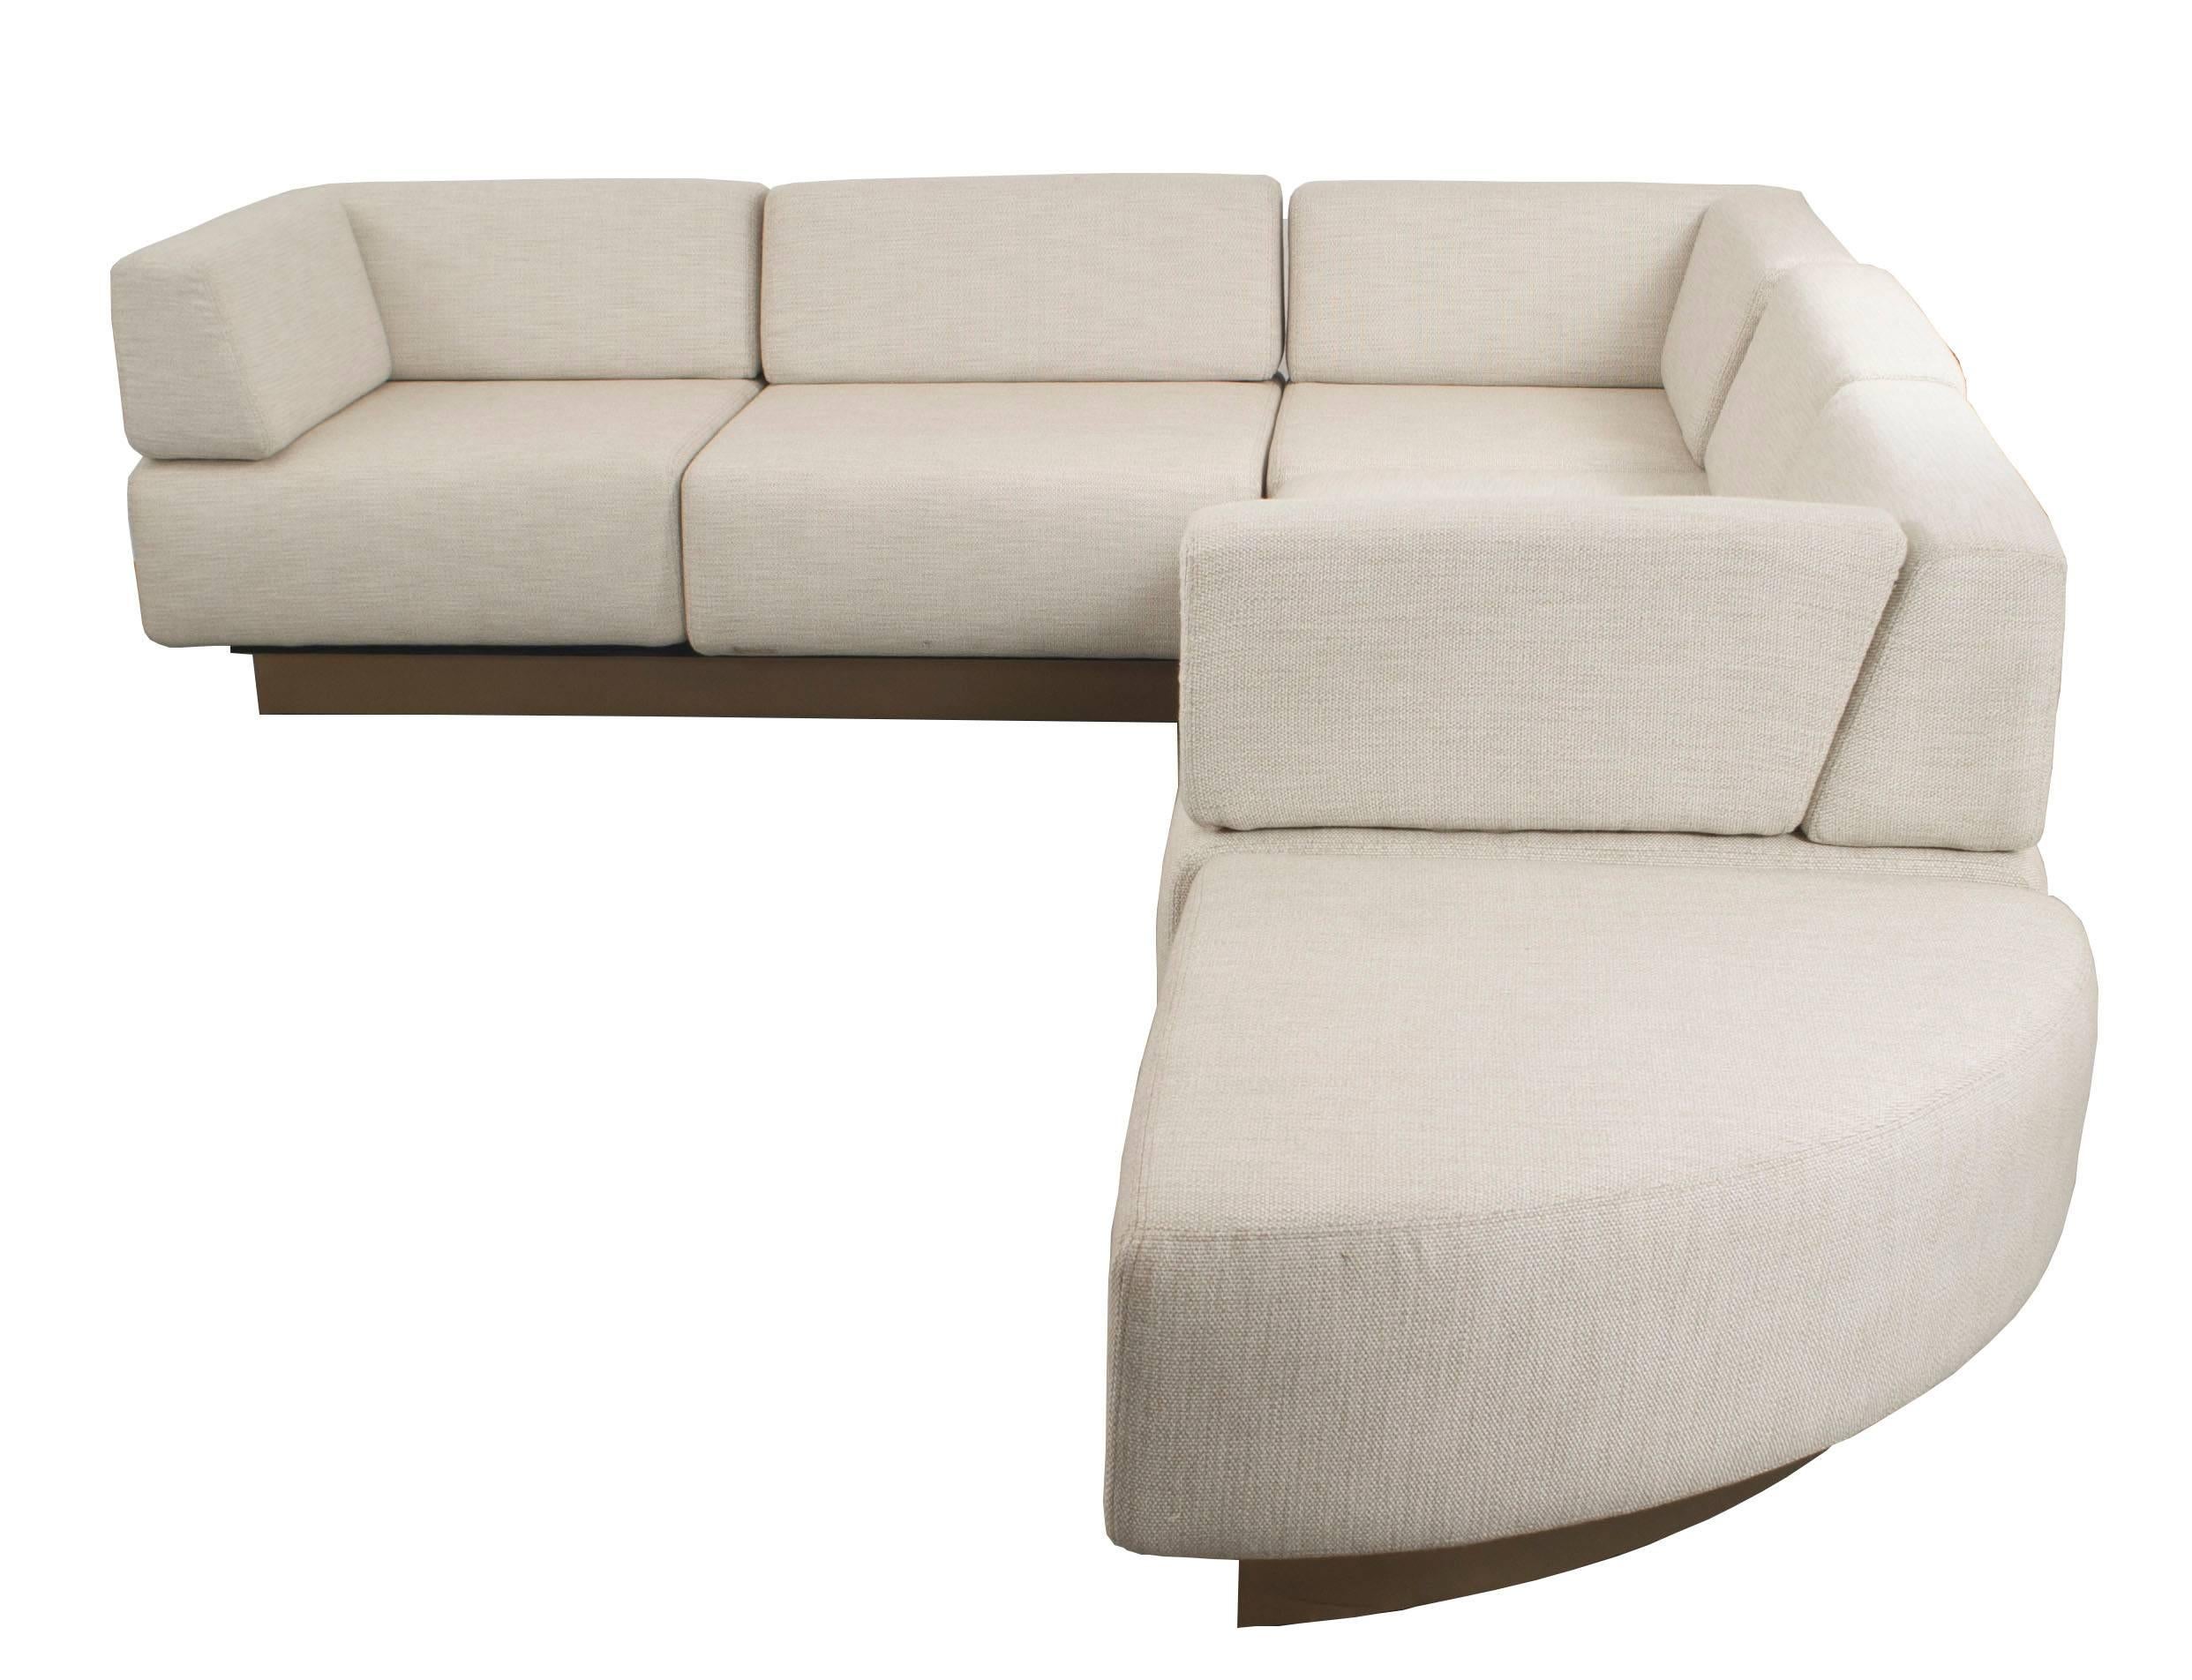 American midcentury four-piece sectional with beige fabric upholstery and a brown wood base frame.  Each arm of sectional: 96